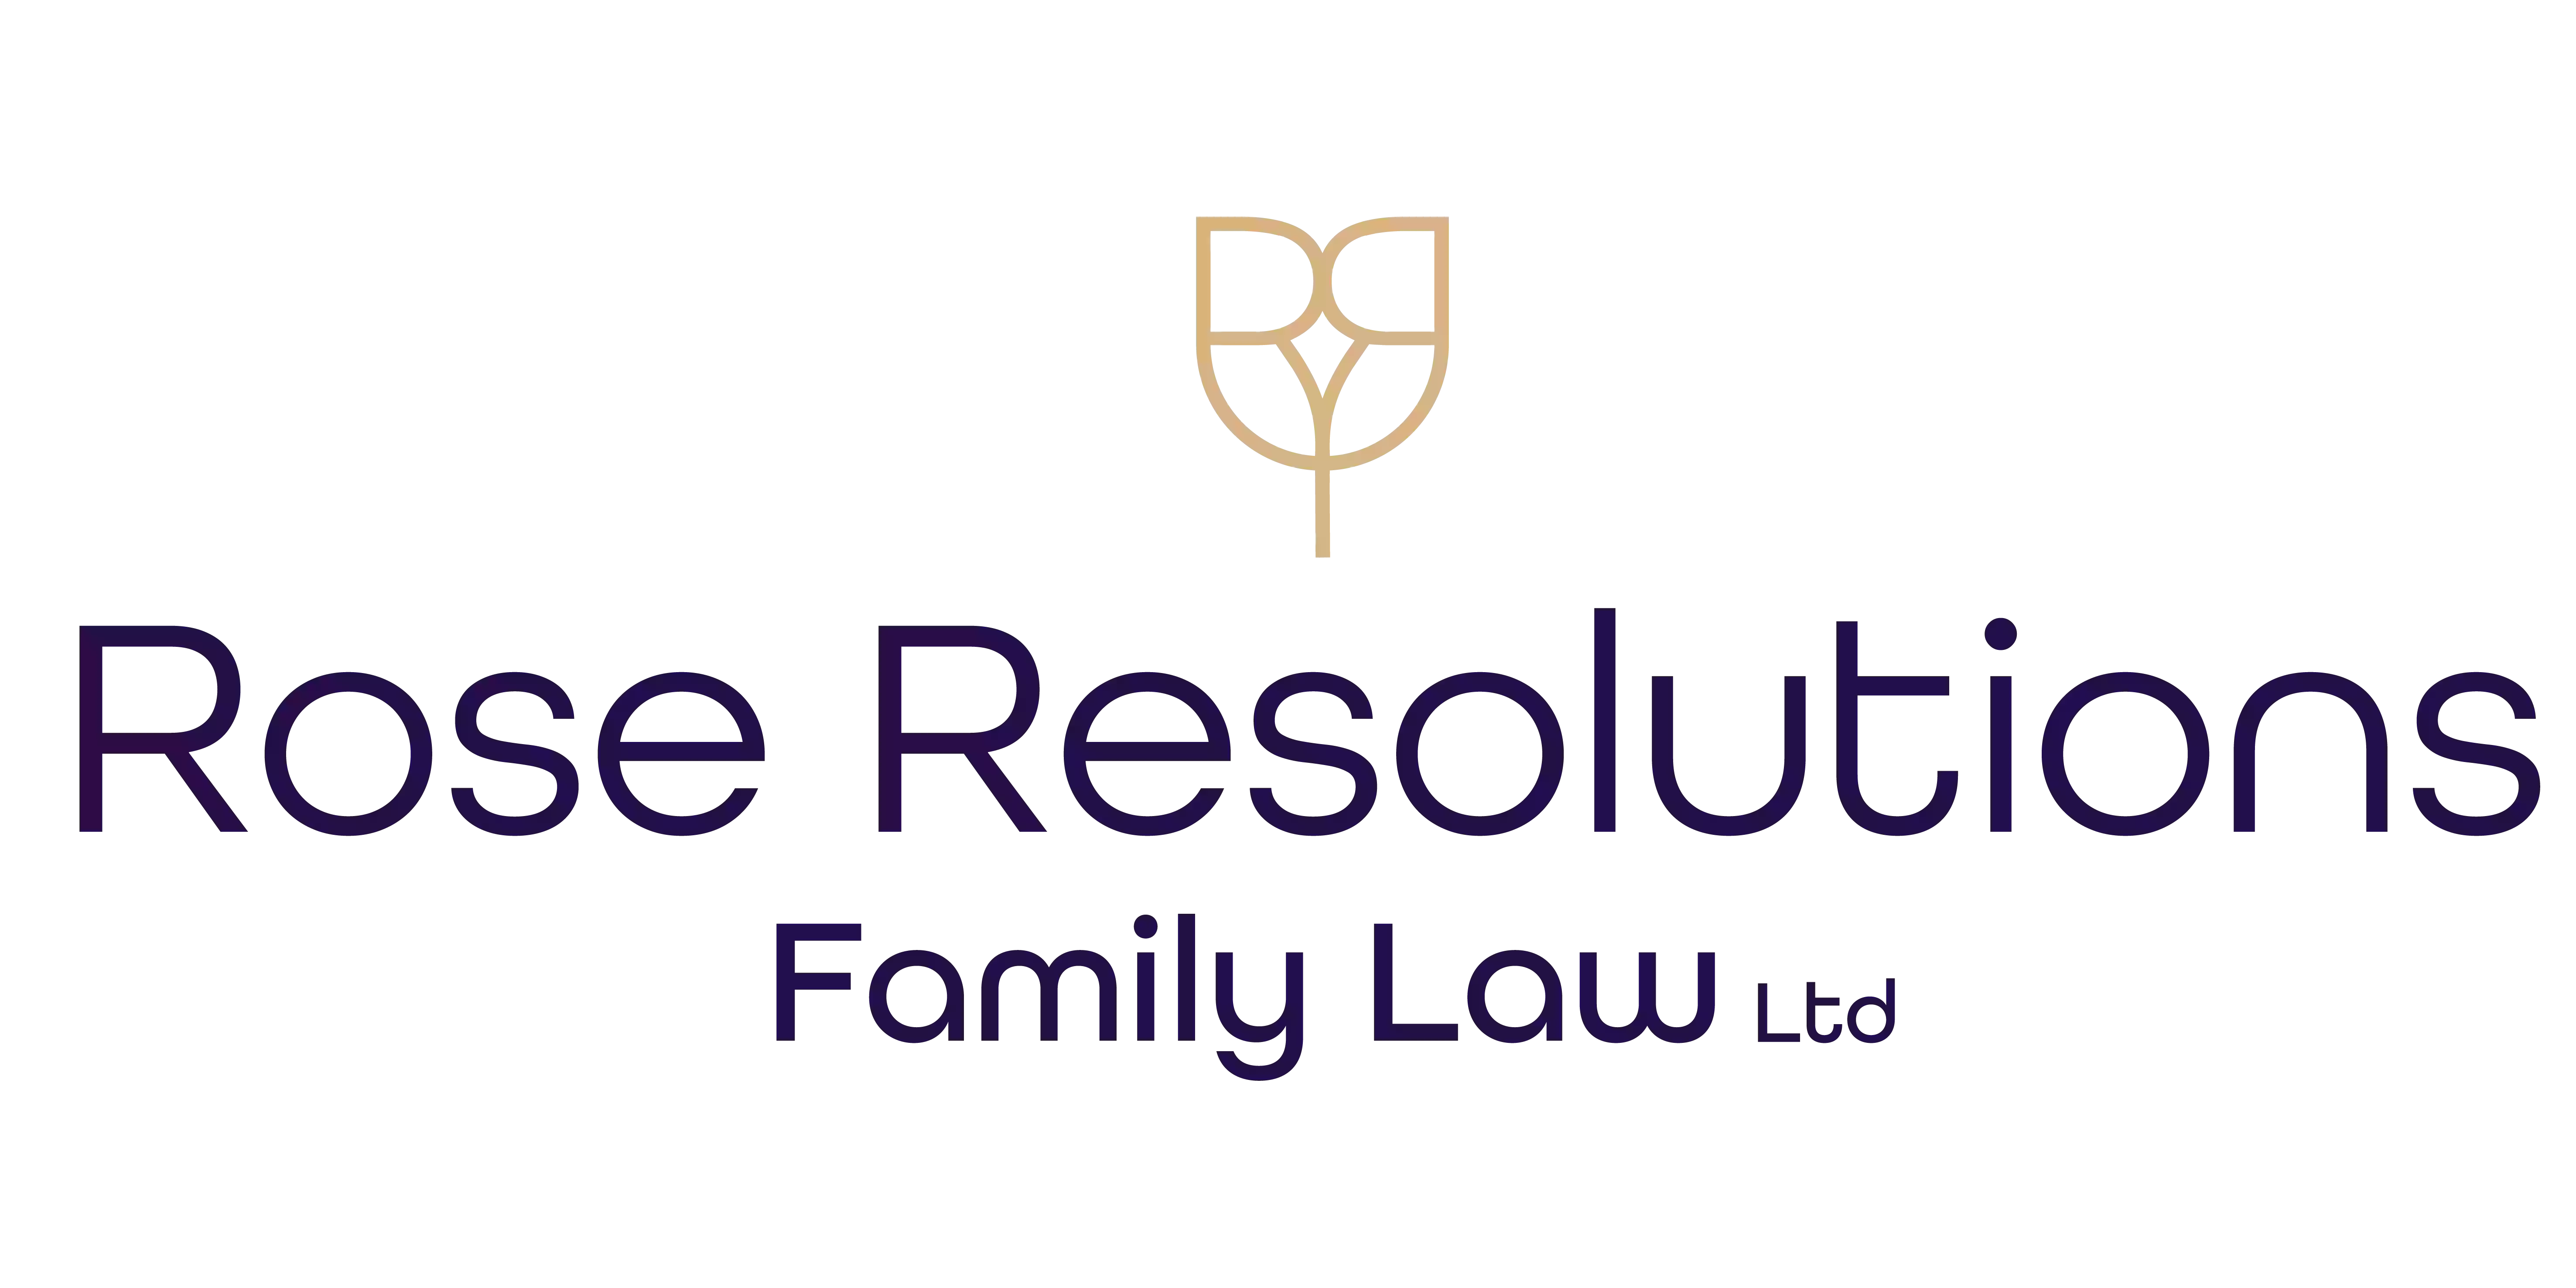 Rose Resolutions Family Law Limited